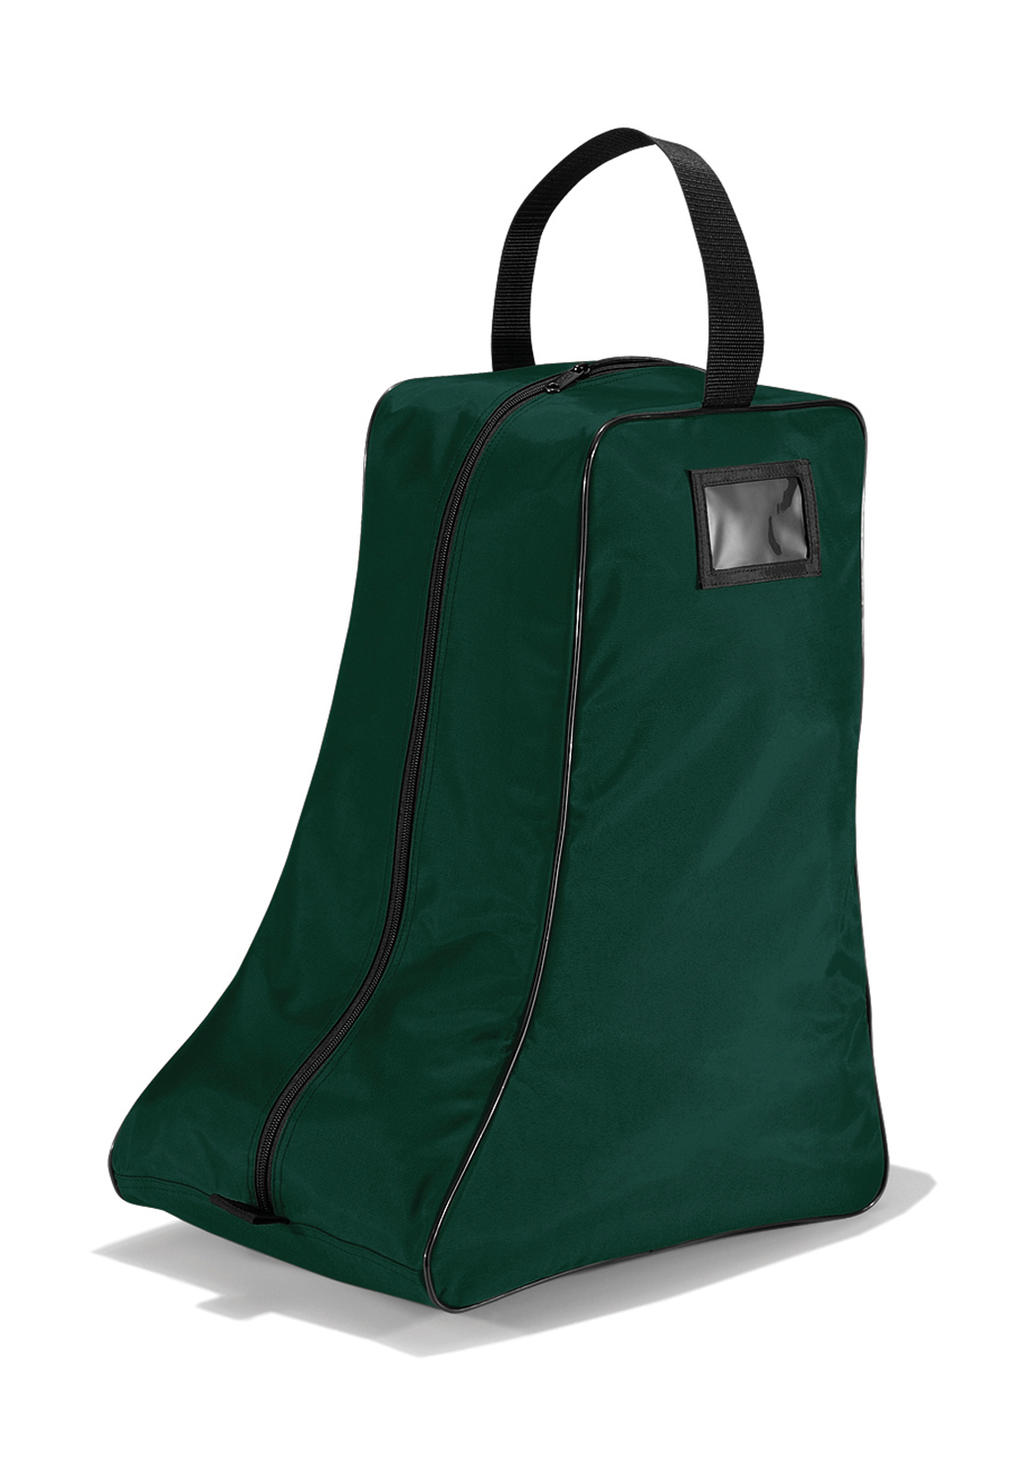  Boots Bag in Farbe Bottle Green/Black